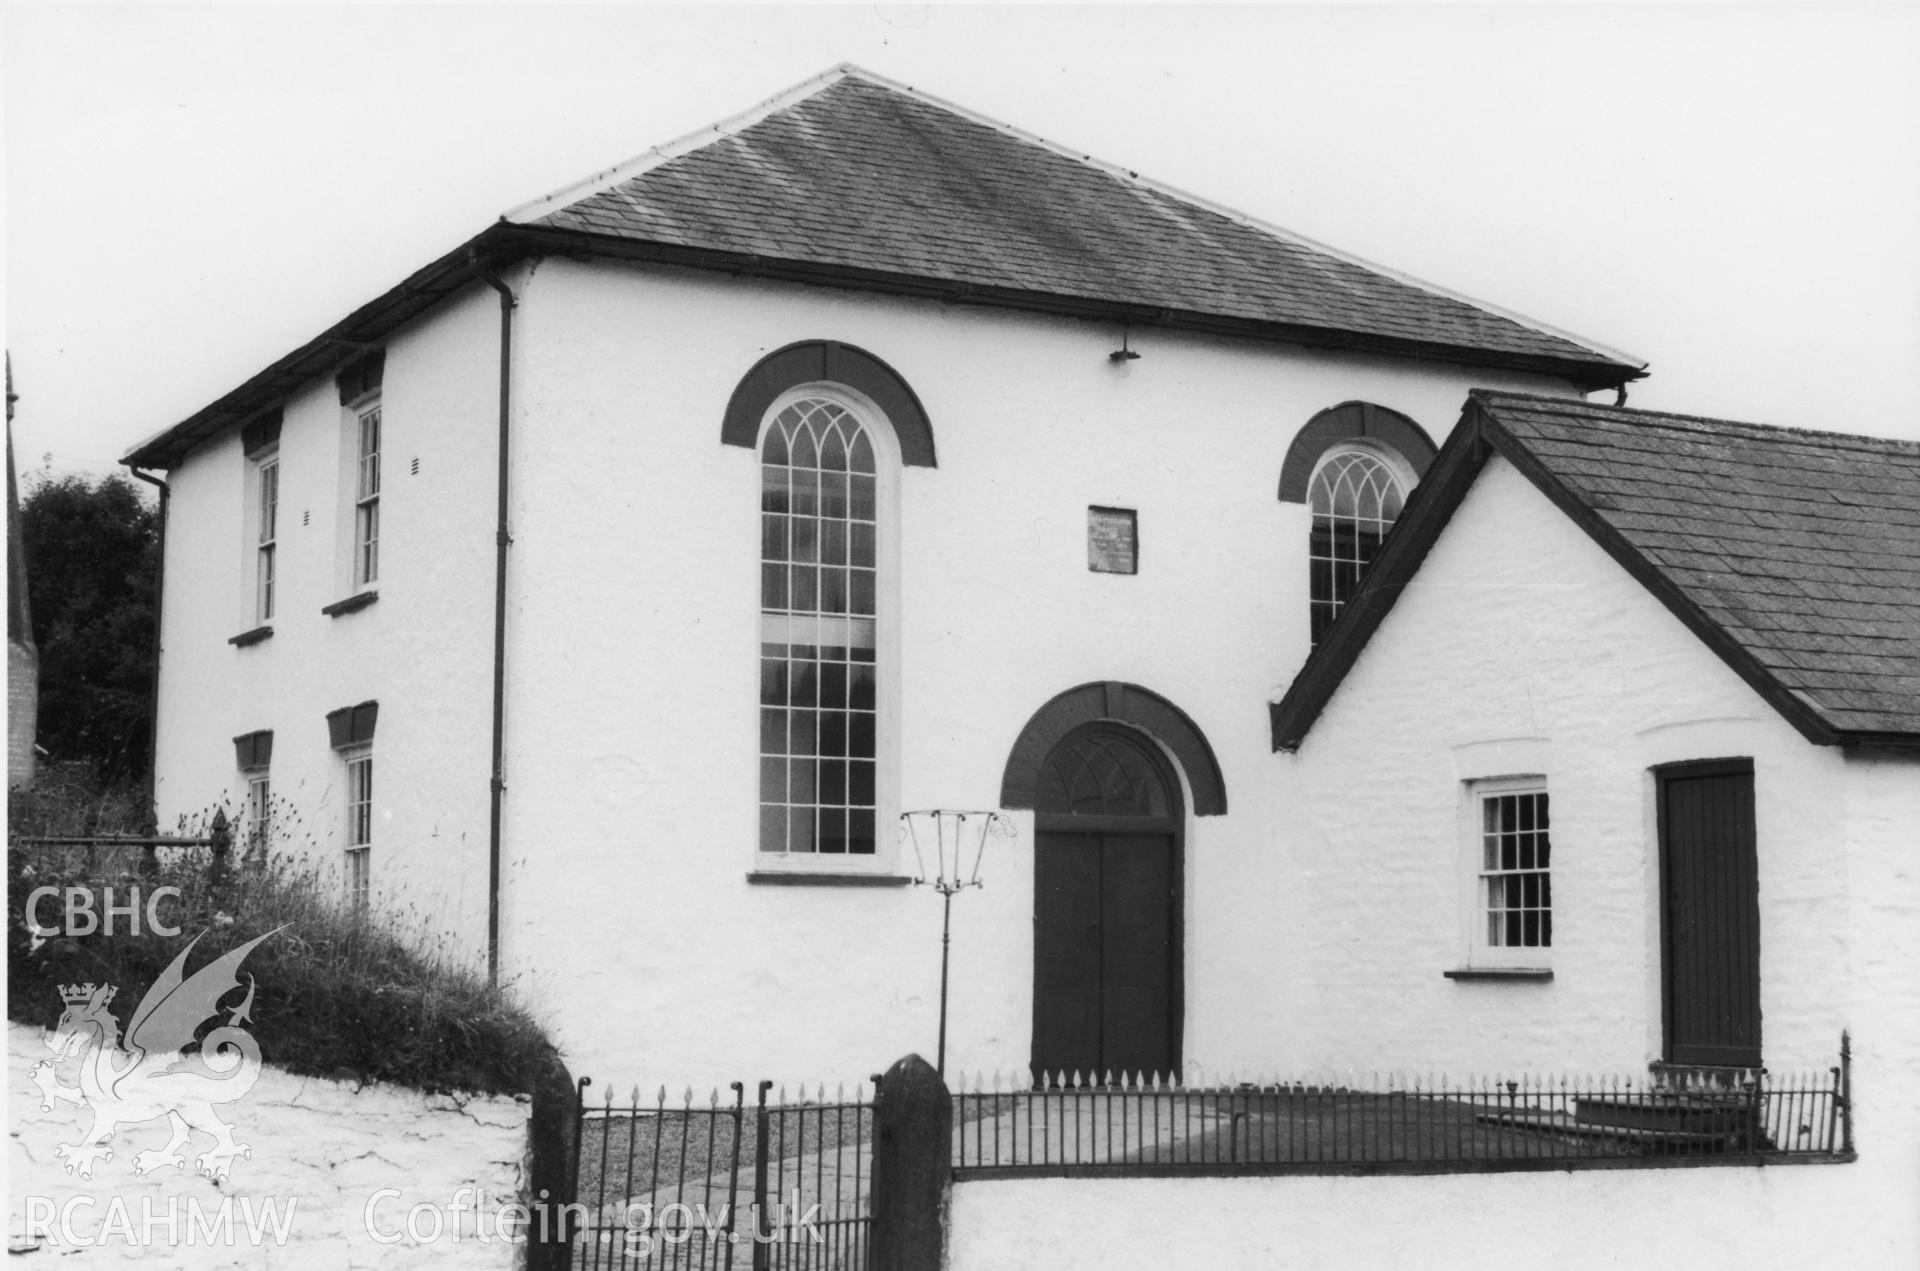 Black and white photo showing an exterior view of Capel Rhyd y Ceisiad, taken by Christopher Stell c.1969.